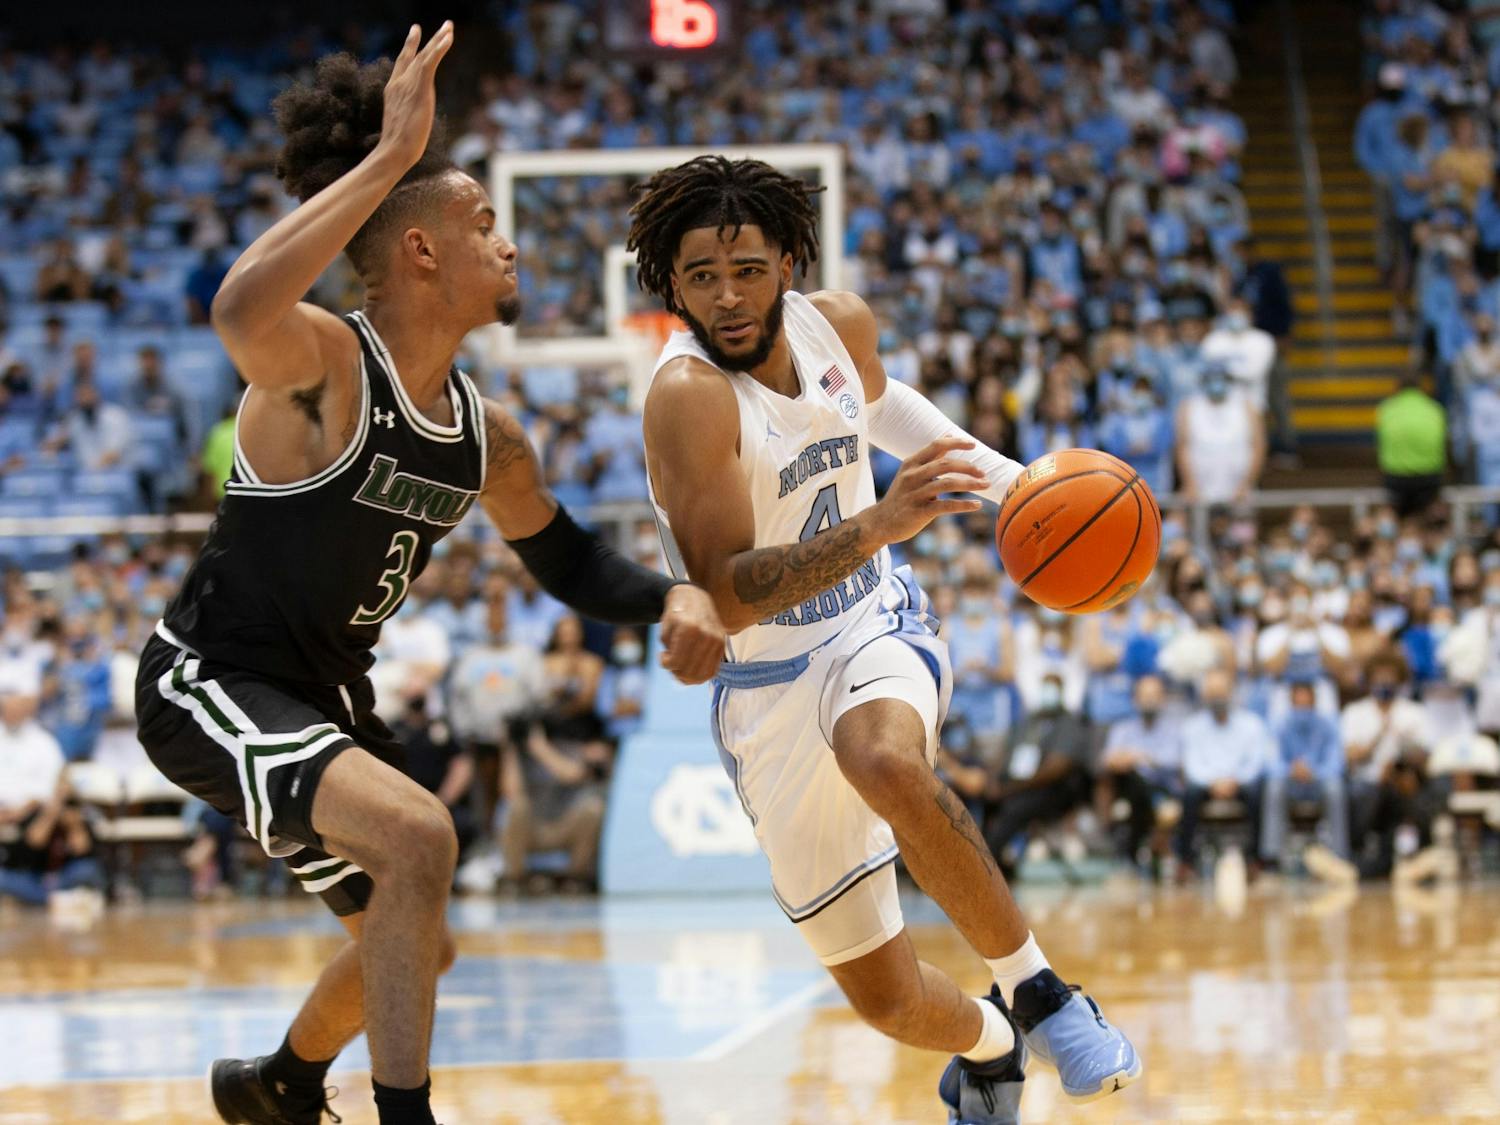 UNC sophomore guard RJ Davis drives the ball towards the basket during the Tar Heel's game against Loyola on Nov. 9, 2021 at the Dean E. Smith Center.